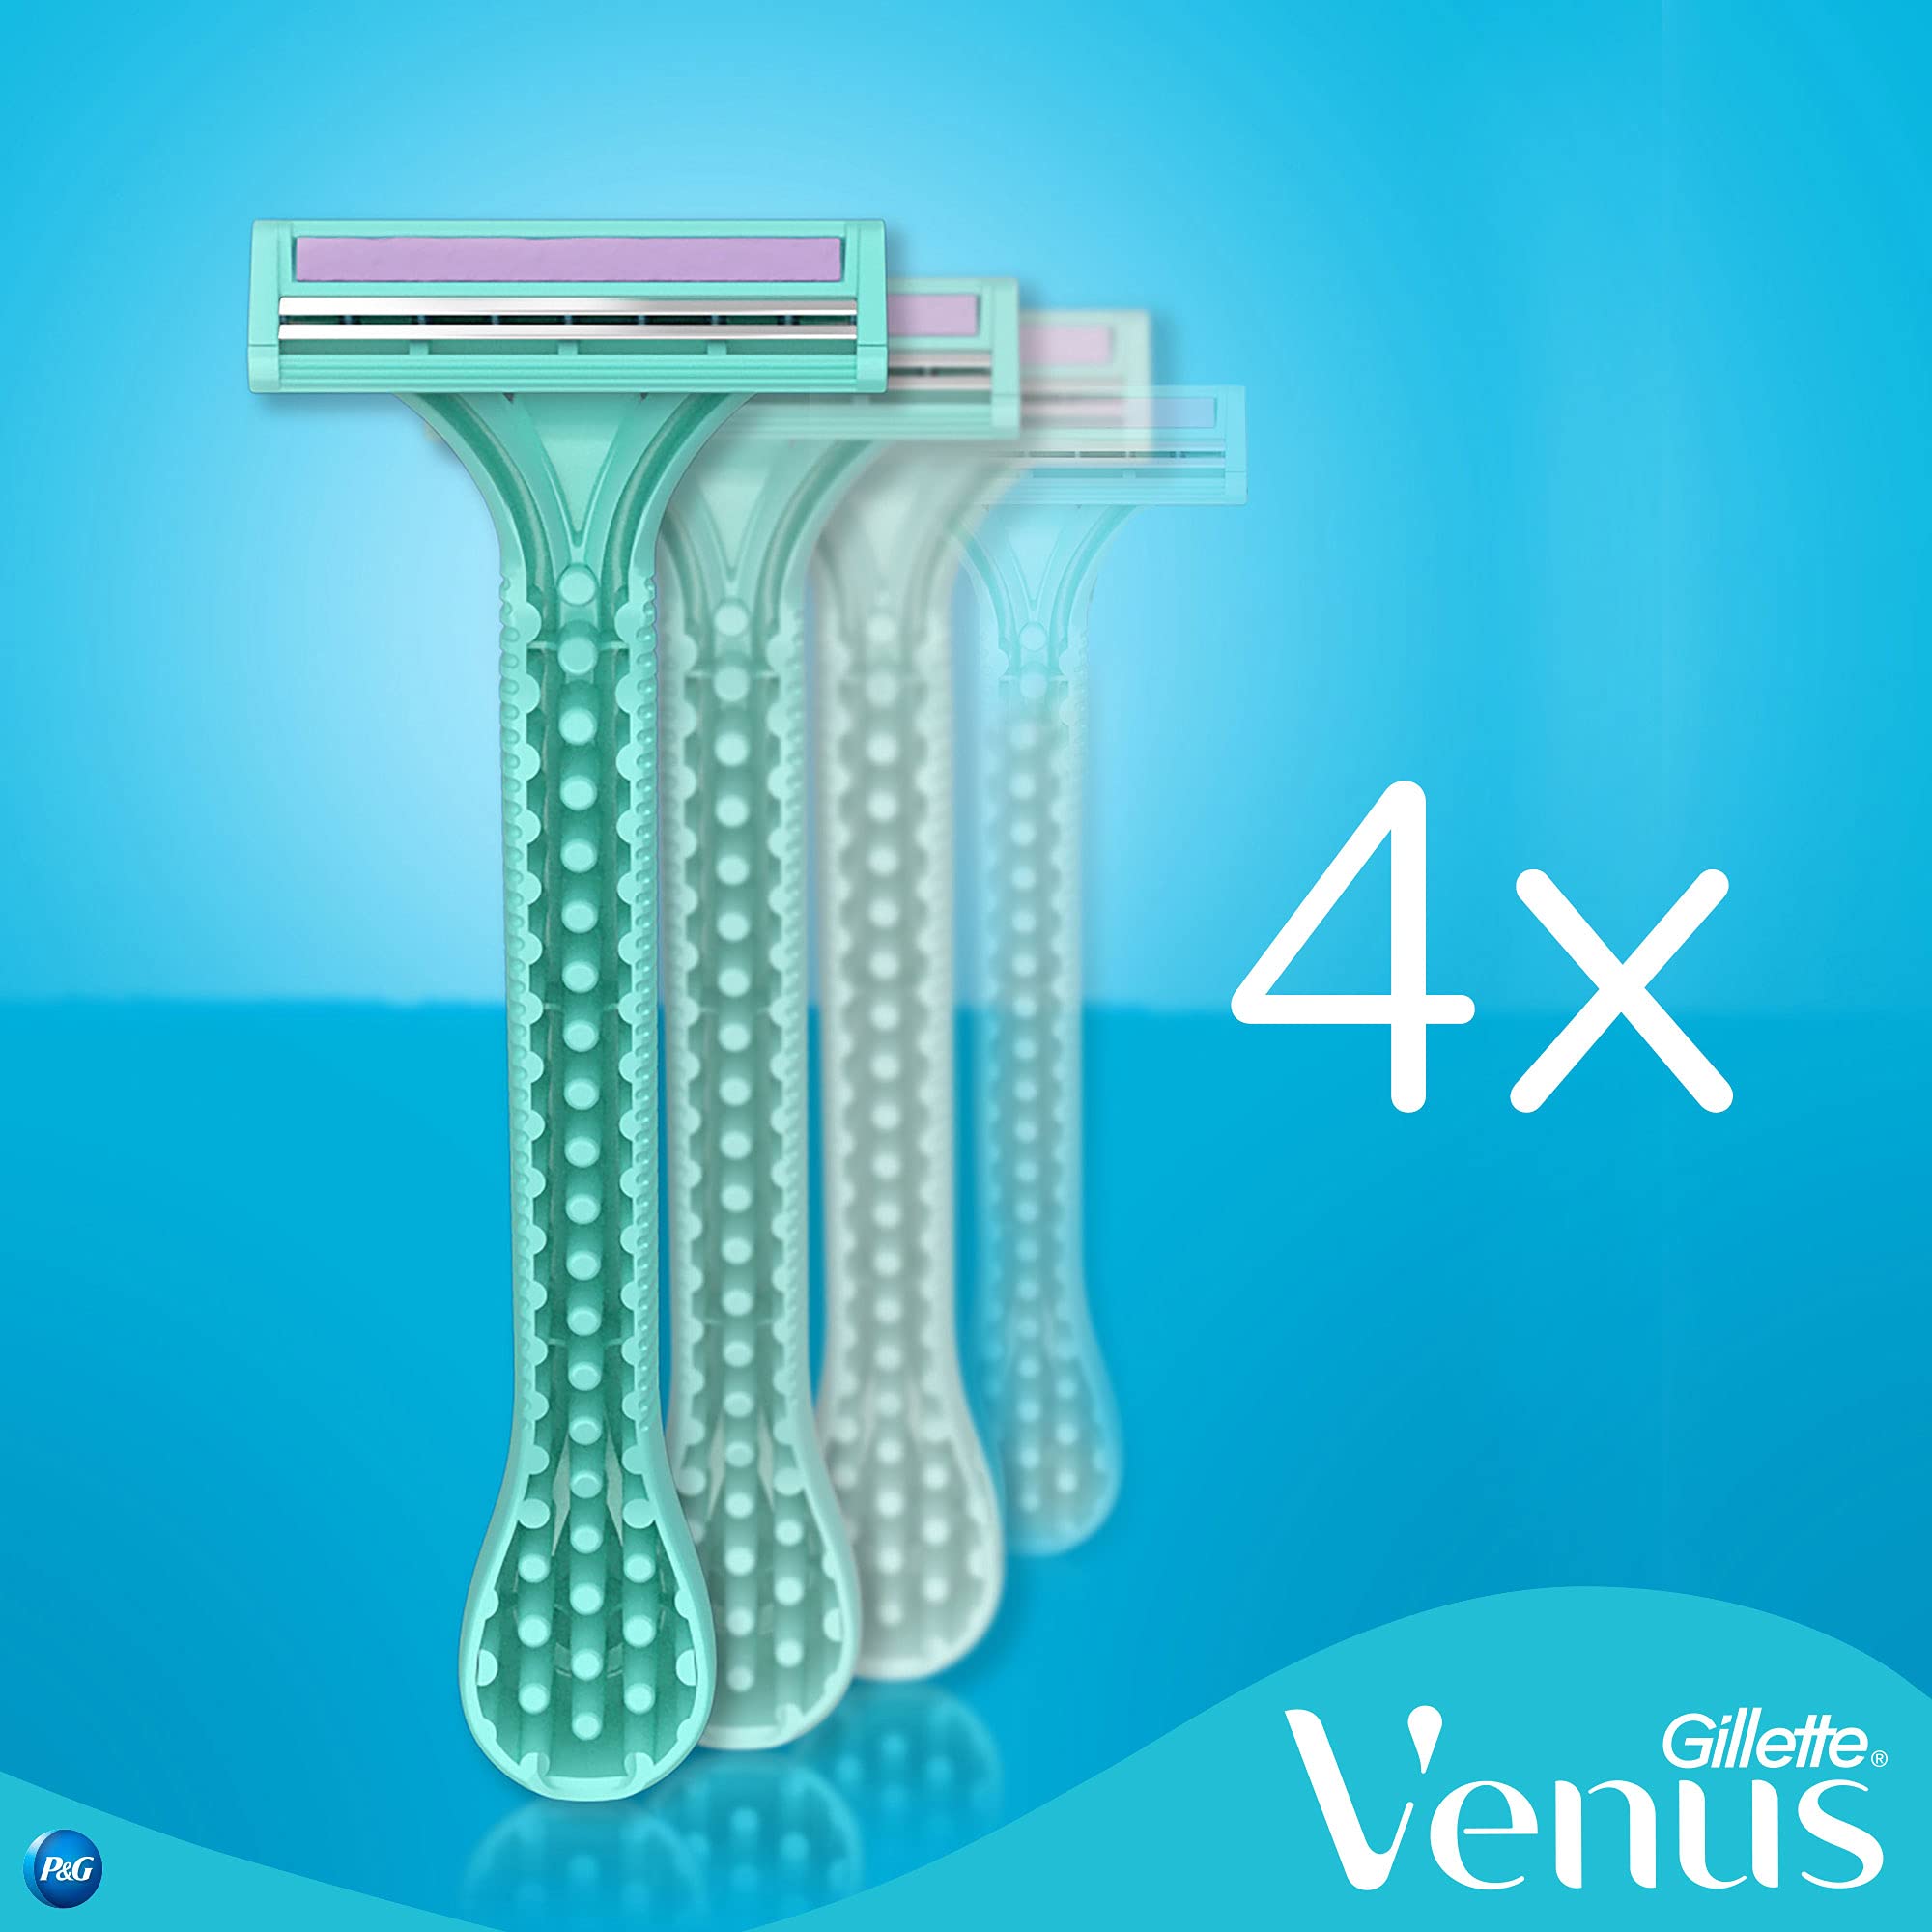 Gillette Simply Venus 2 Blade Disposable Razors With A Touch of Aloe, 4 Count - image 6 of 7